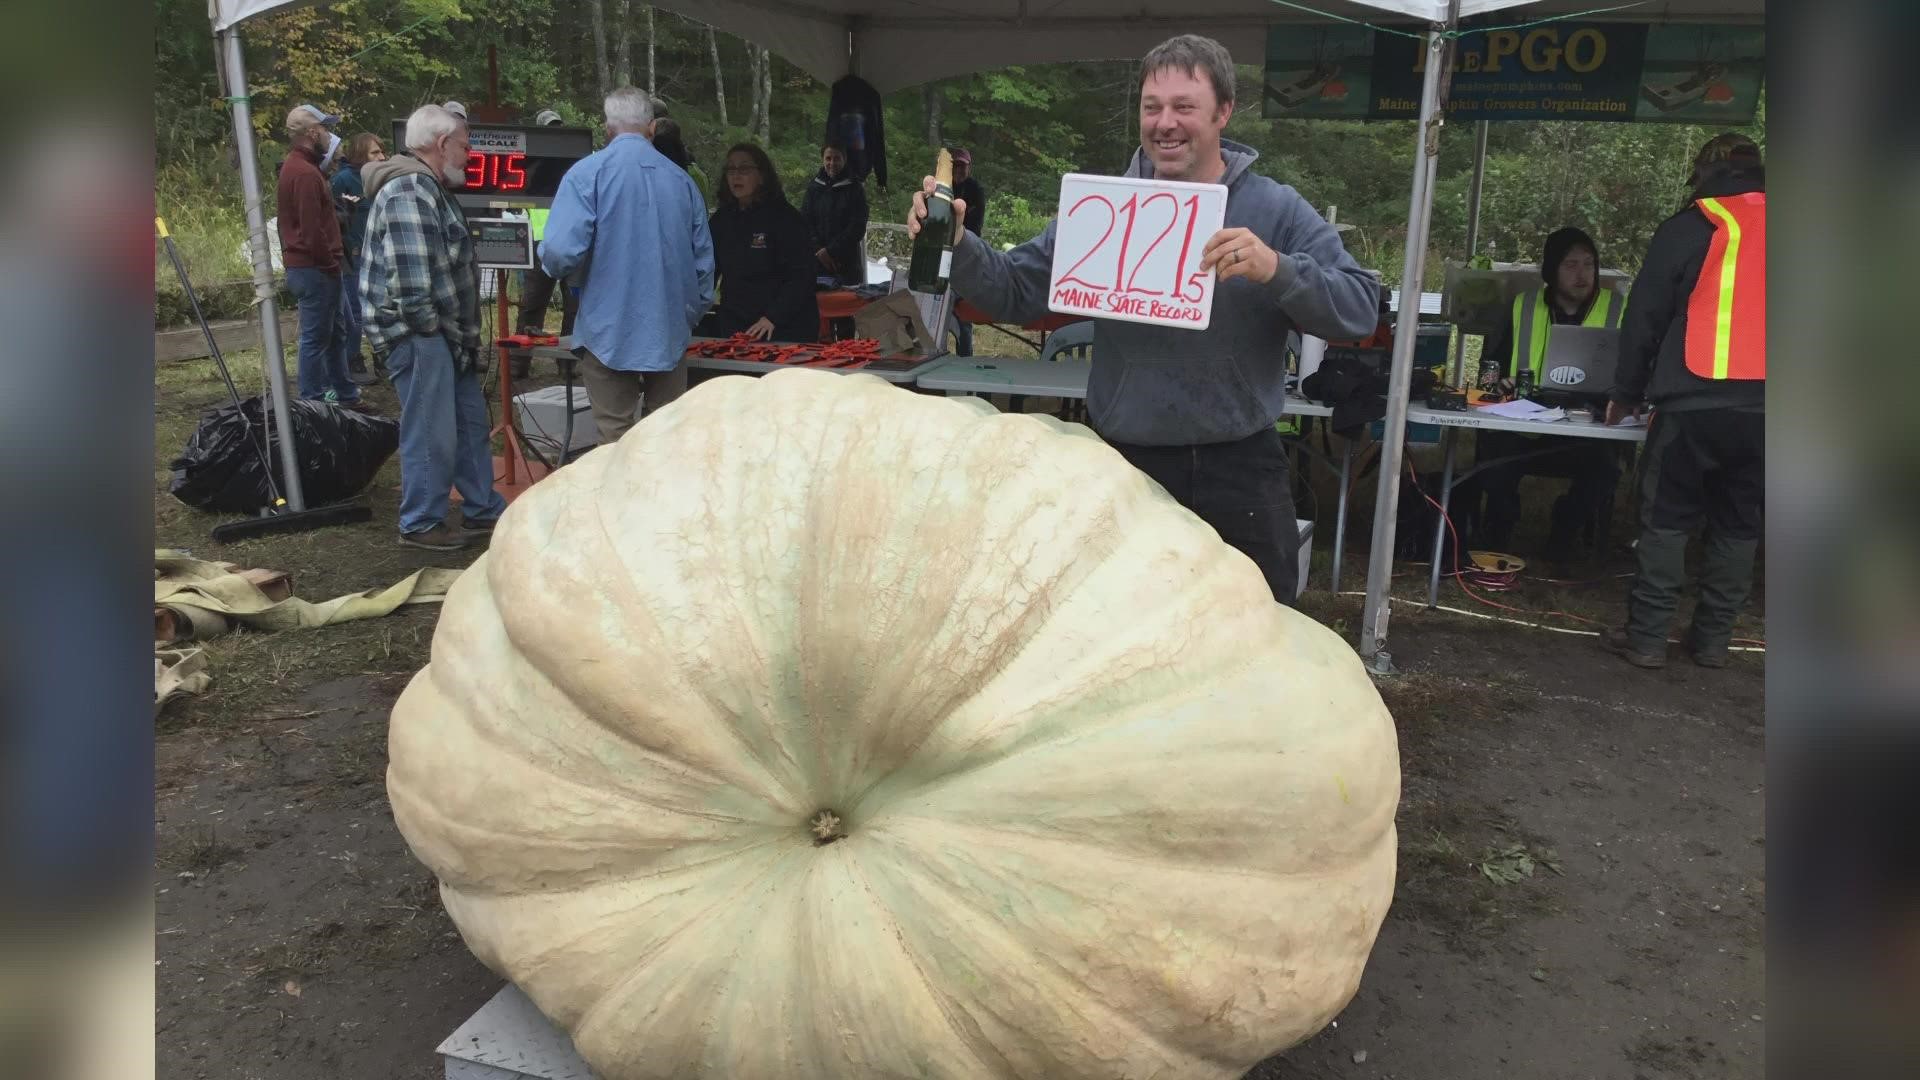 Edwin Pierpont of Jefferson set a new Maine record for giant pumpkins with a mammoth 2,121.5 pound pumpkin.